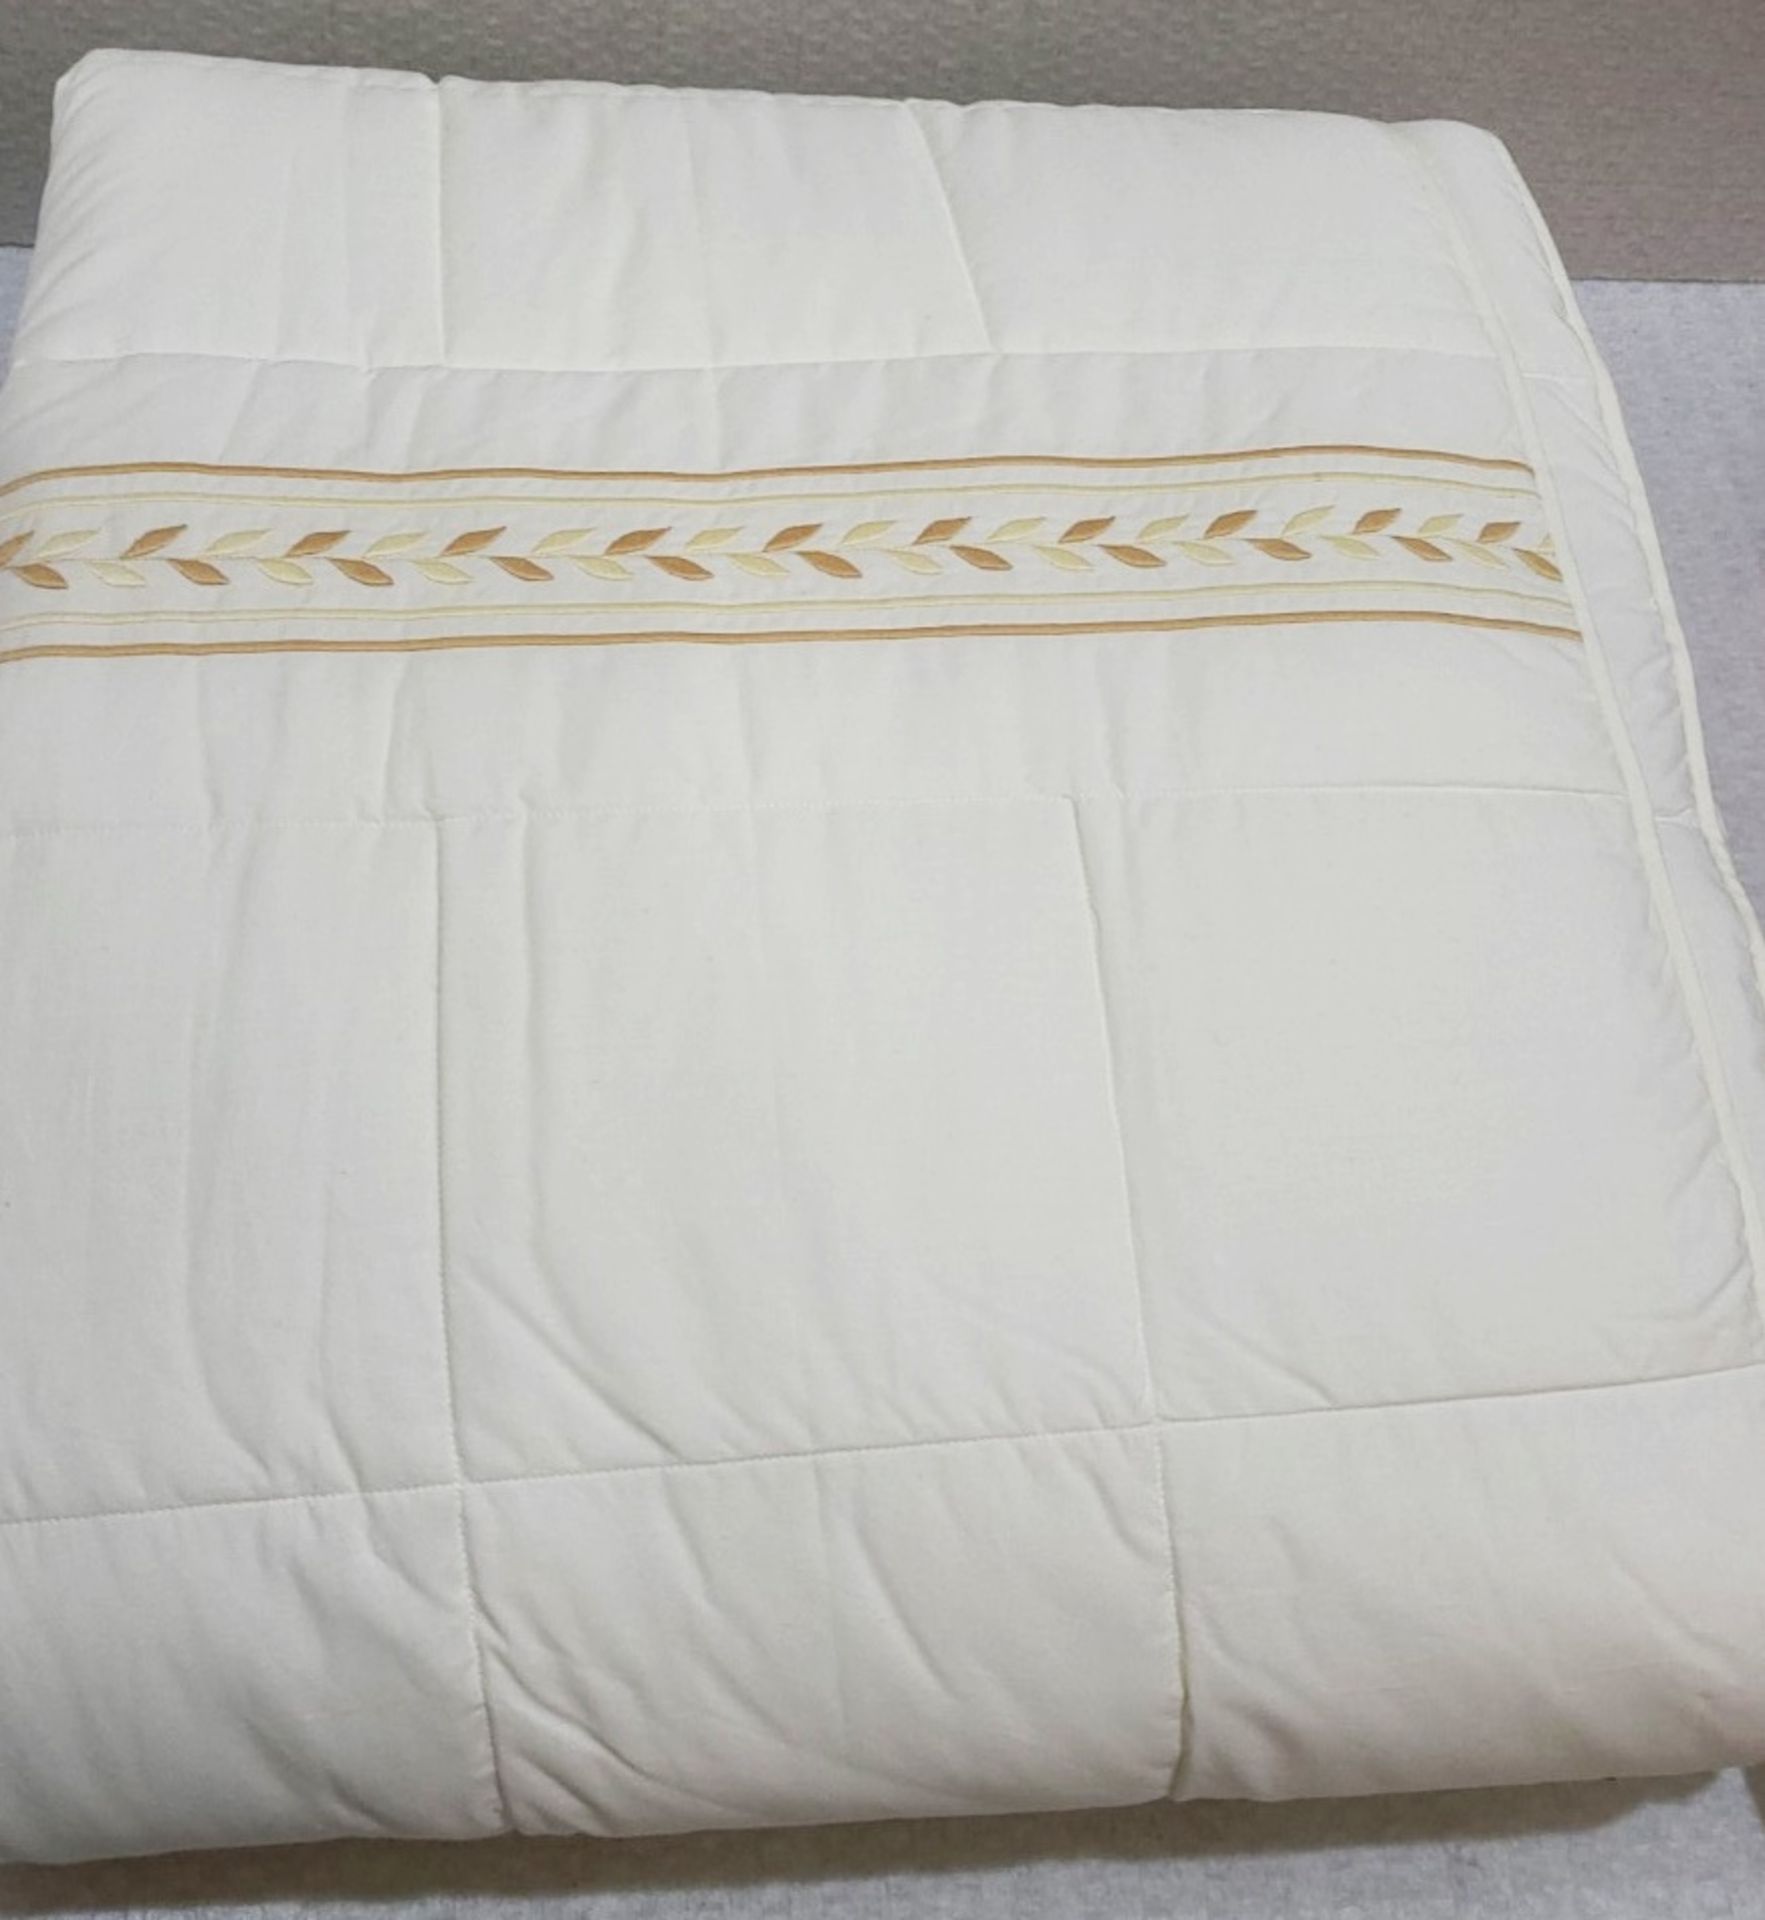 1 x PRATESI 'Impero' Luxury Italian Angel Skin Cotton Quilt Featuring Gold Embroidery - RRP £1,580 - Image 3 of 5